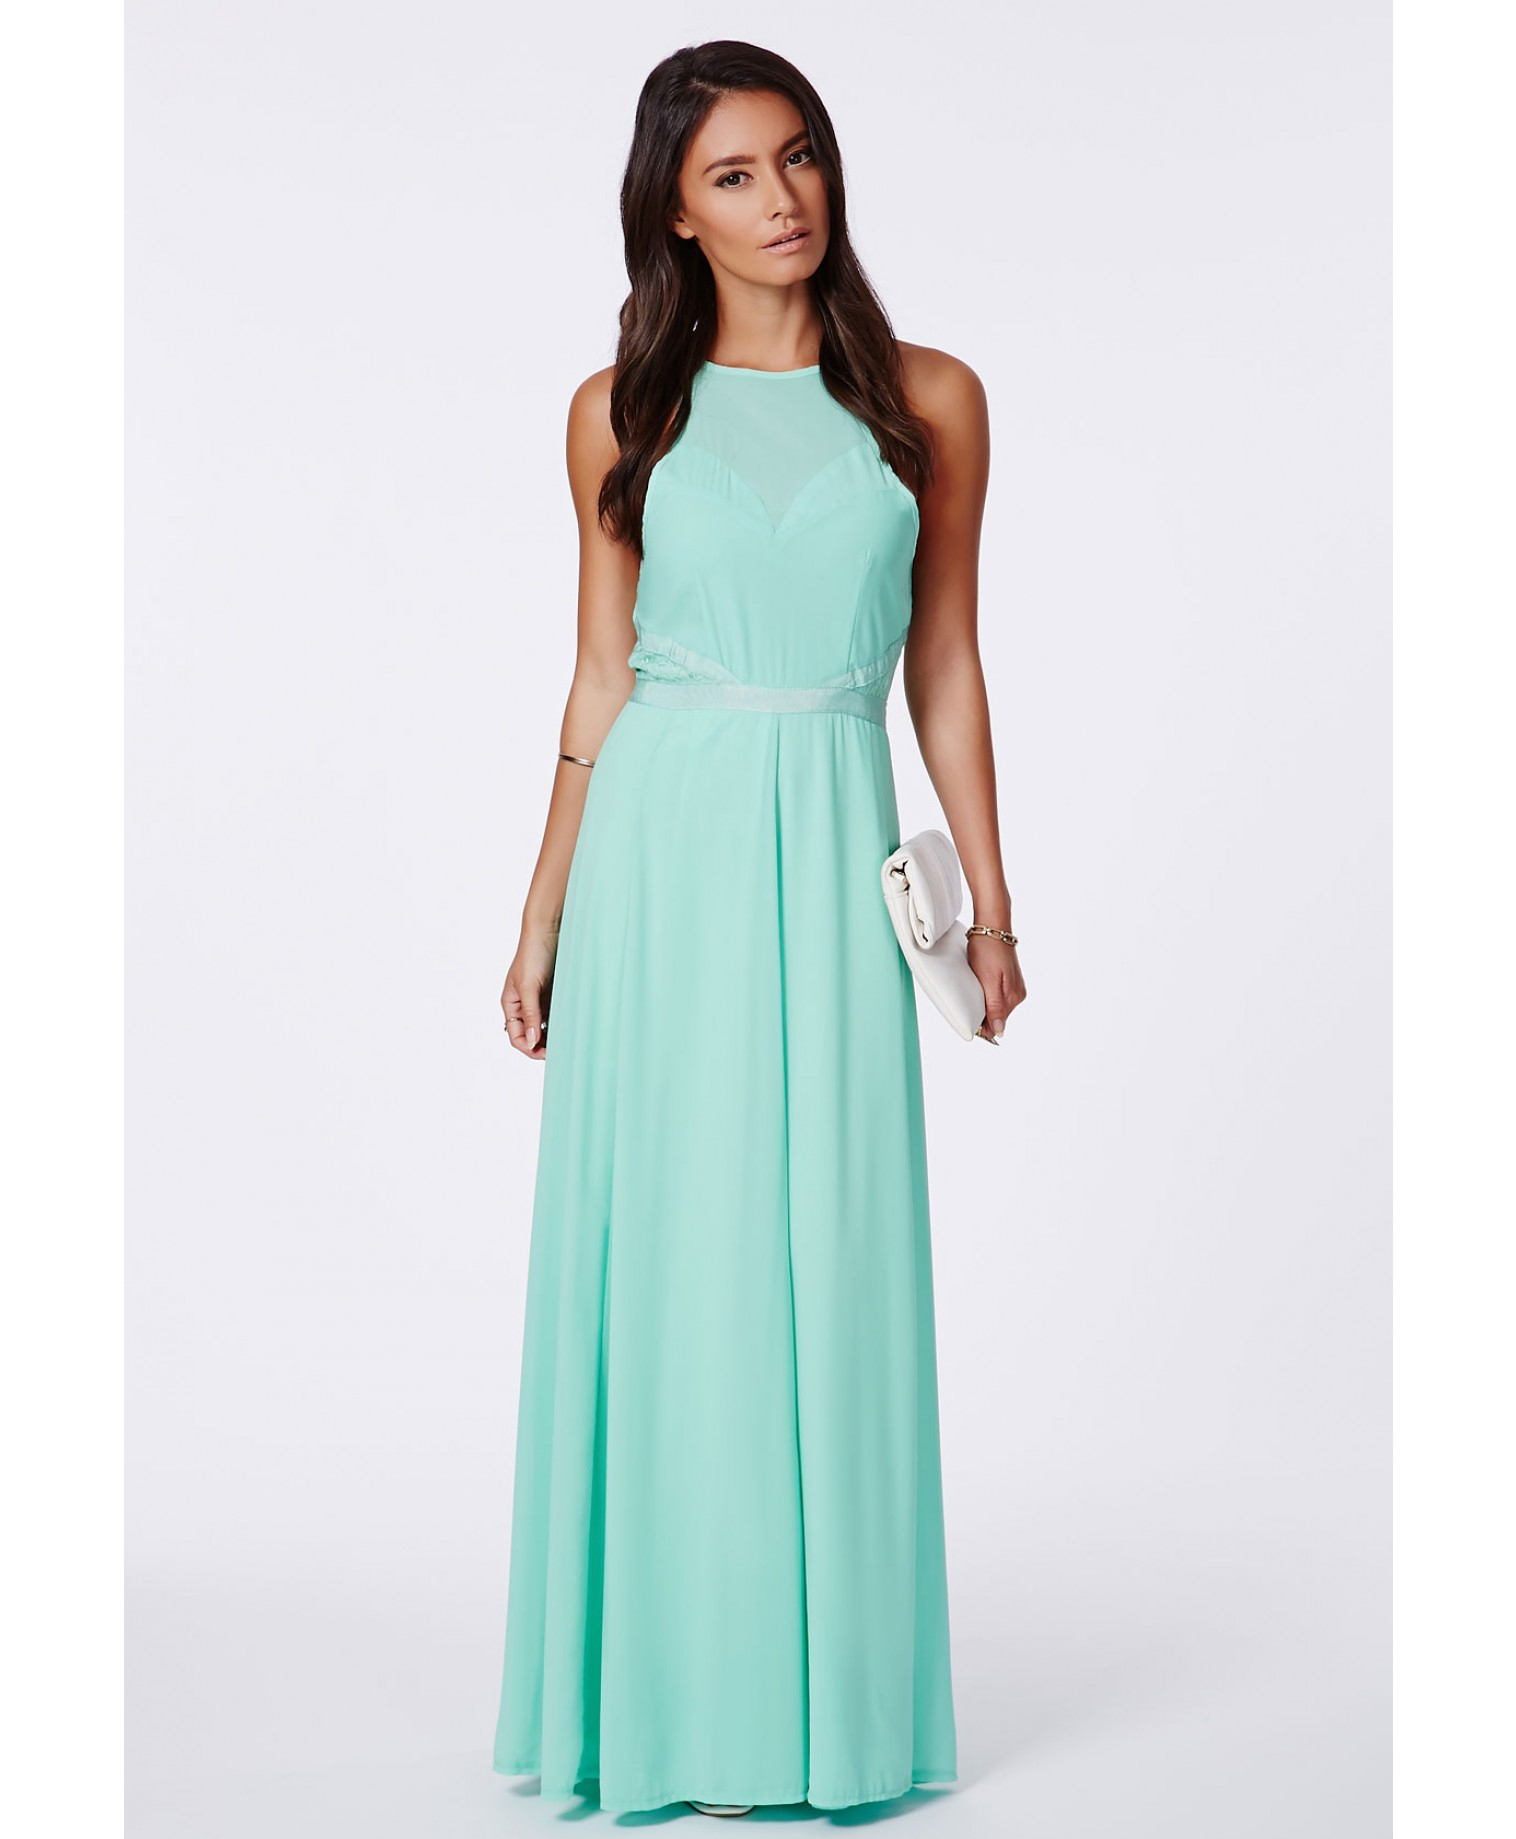 Missguided Green Kamilinka Mint Lace Backless Maxi Dress Product 1 21475114 6 449052822 Normal 